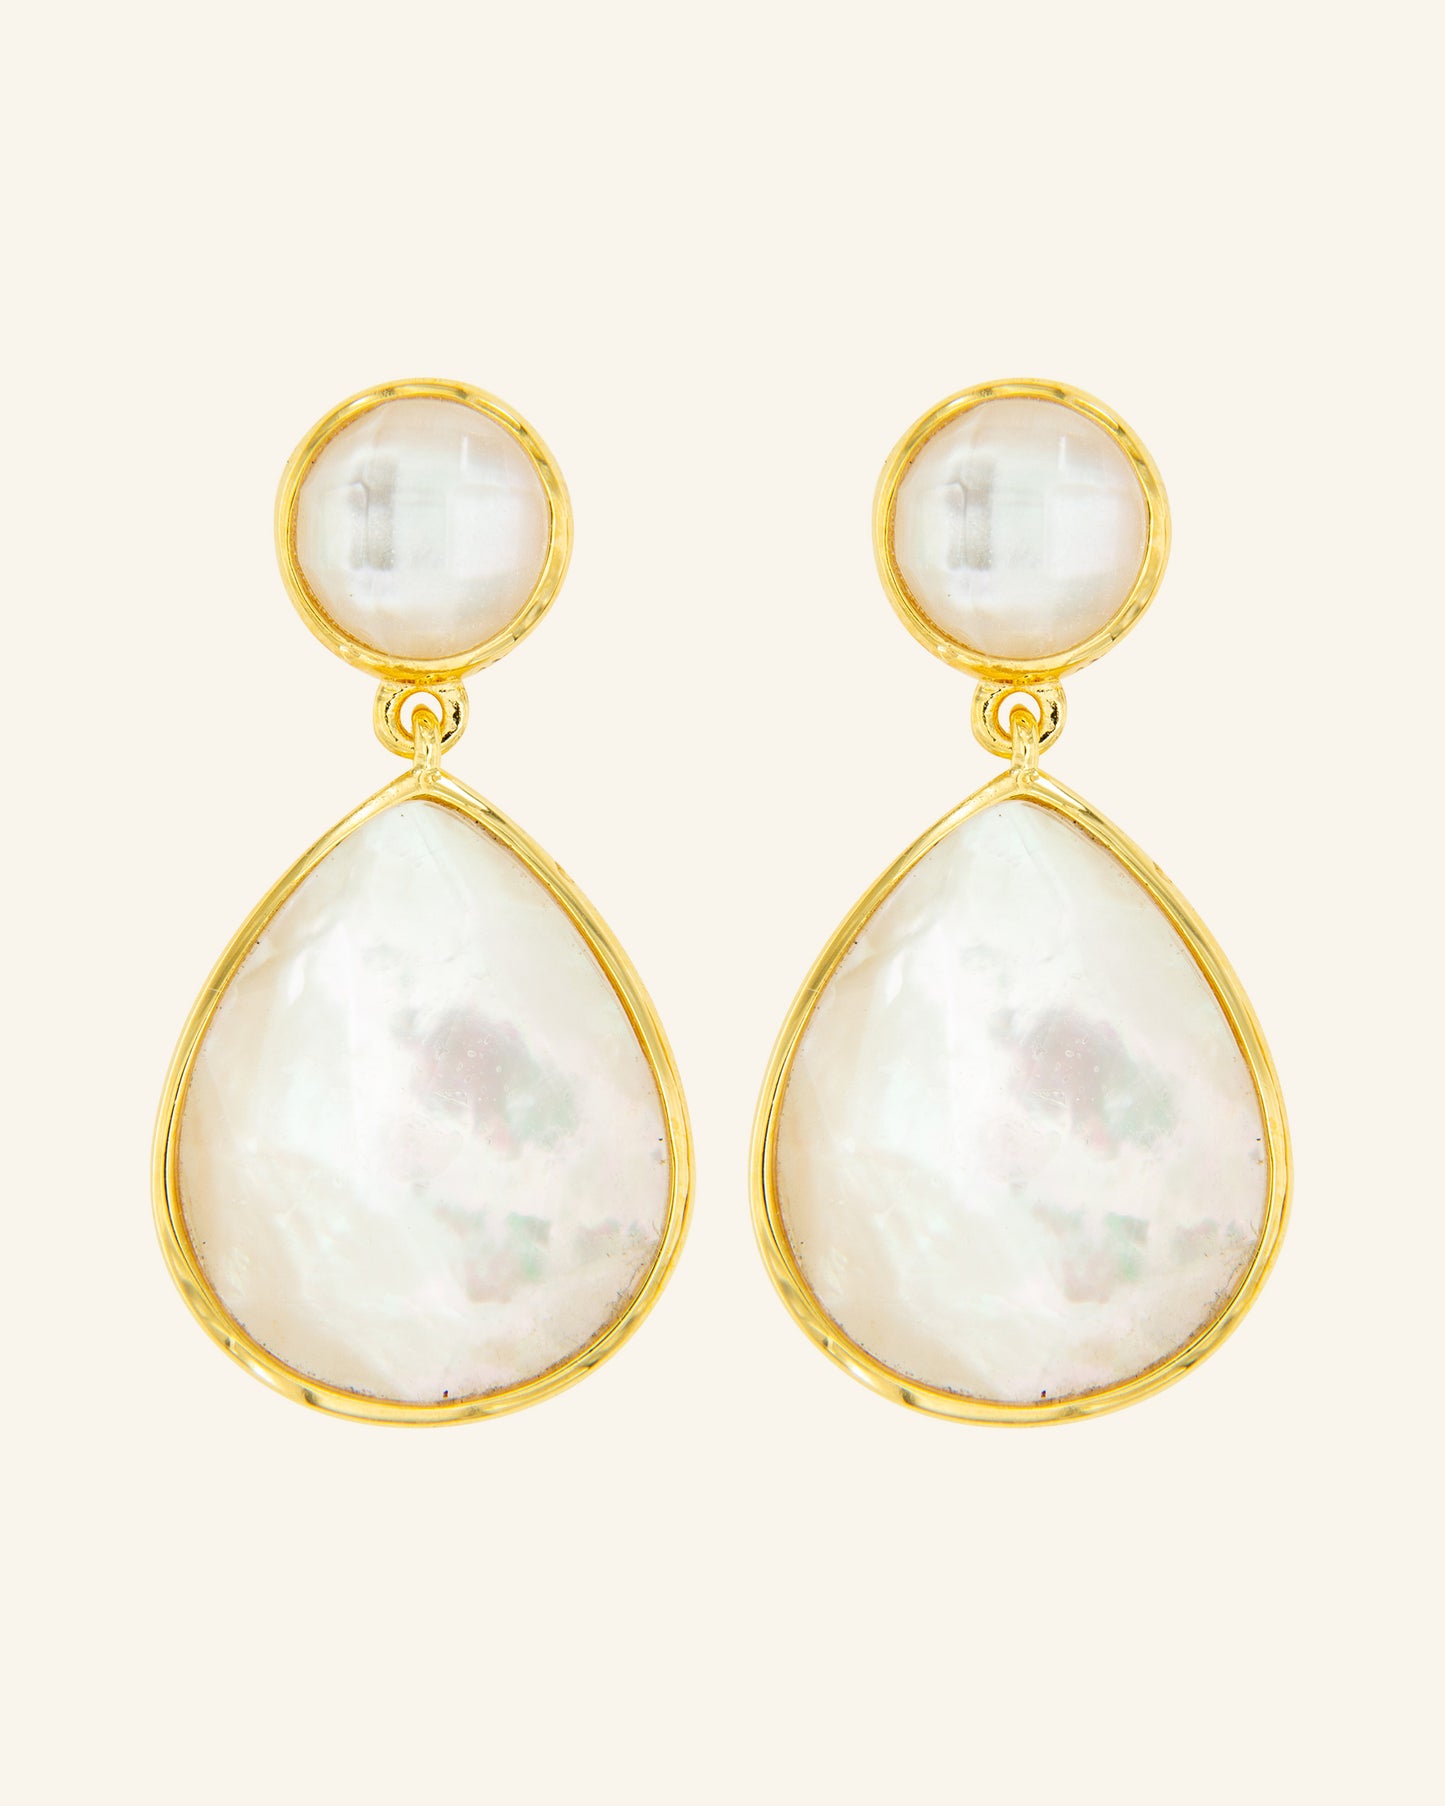 Zeus earrings with white mother of pearl and quartz